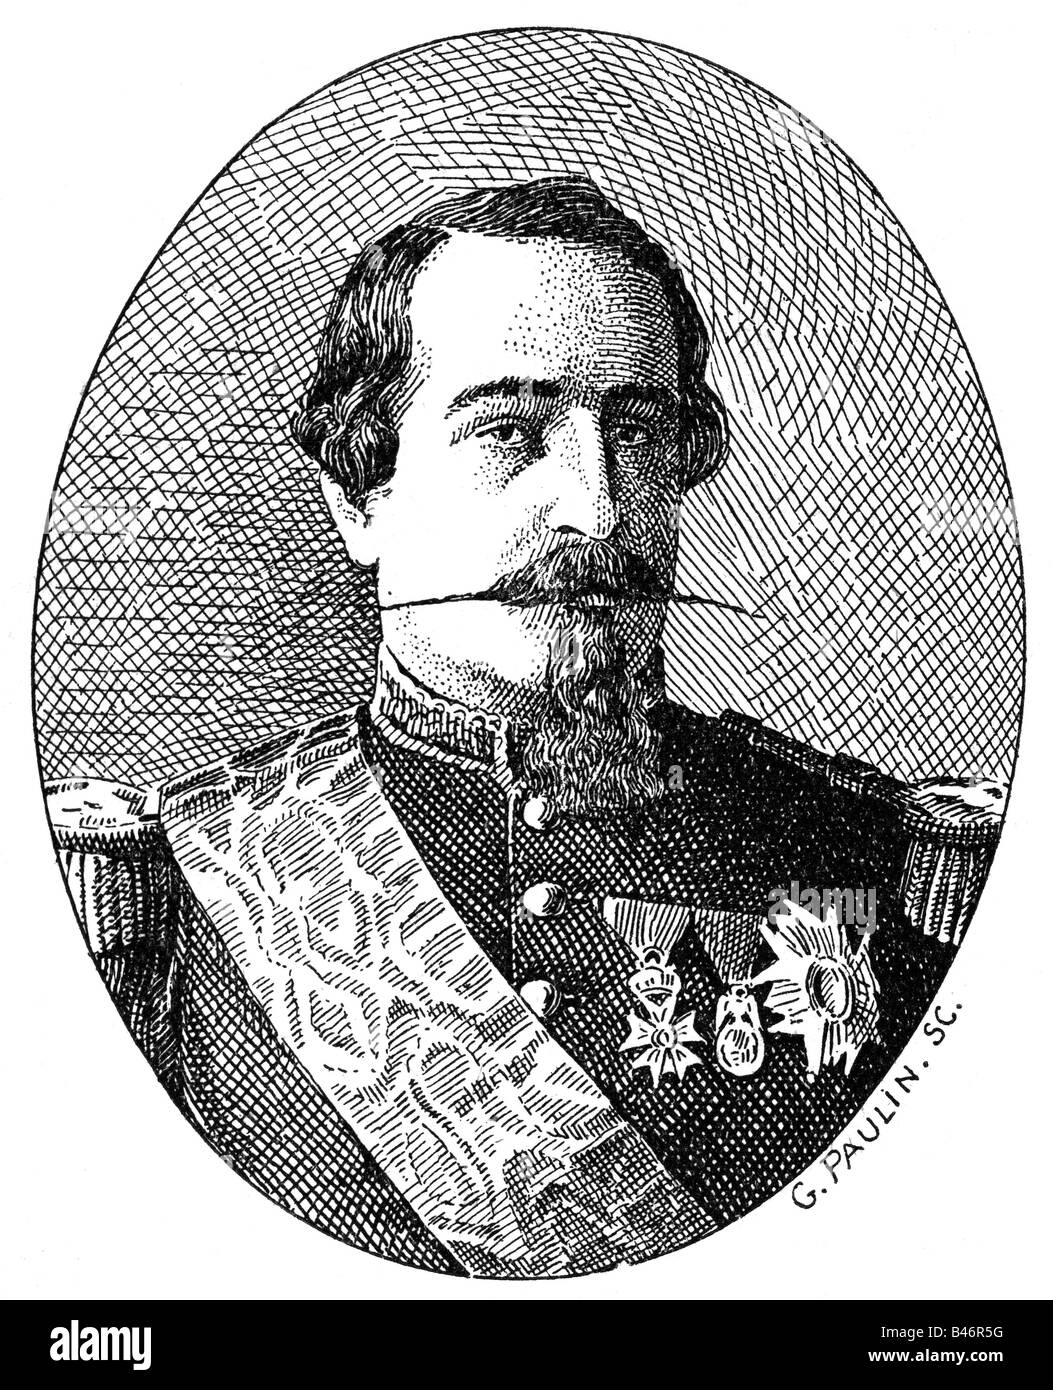 Napoleon III, 20.4.1808 - 9.1.1873, Emperor of the French 2.12.1852 - 2.9.1870, portrait, wood engraving by Paulin, late 19th century, , Stock Photo